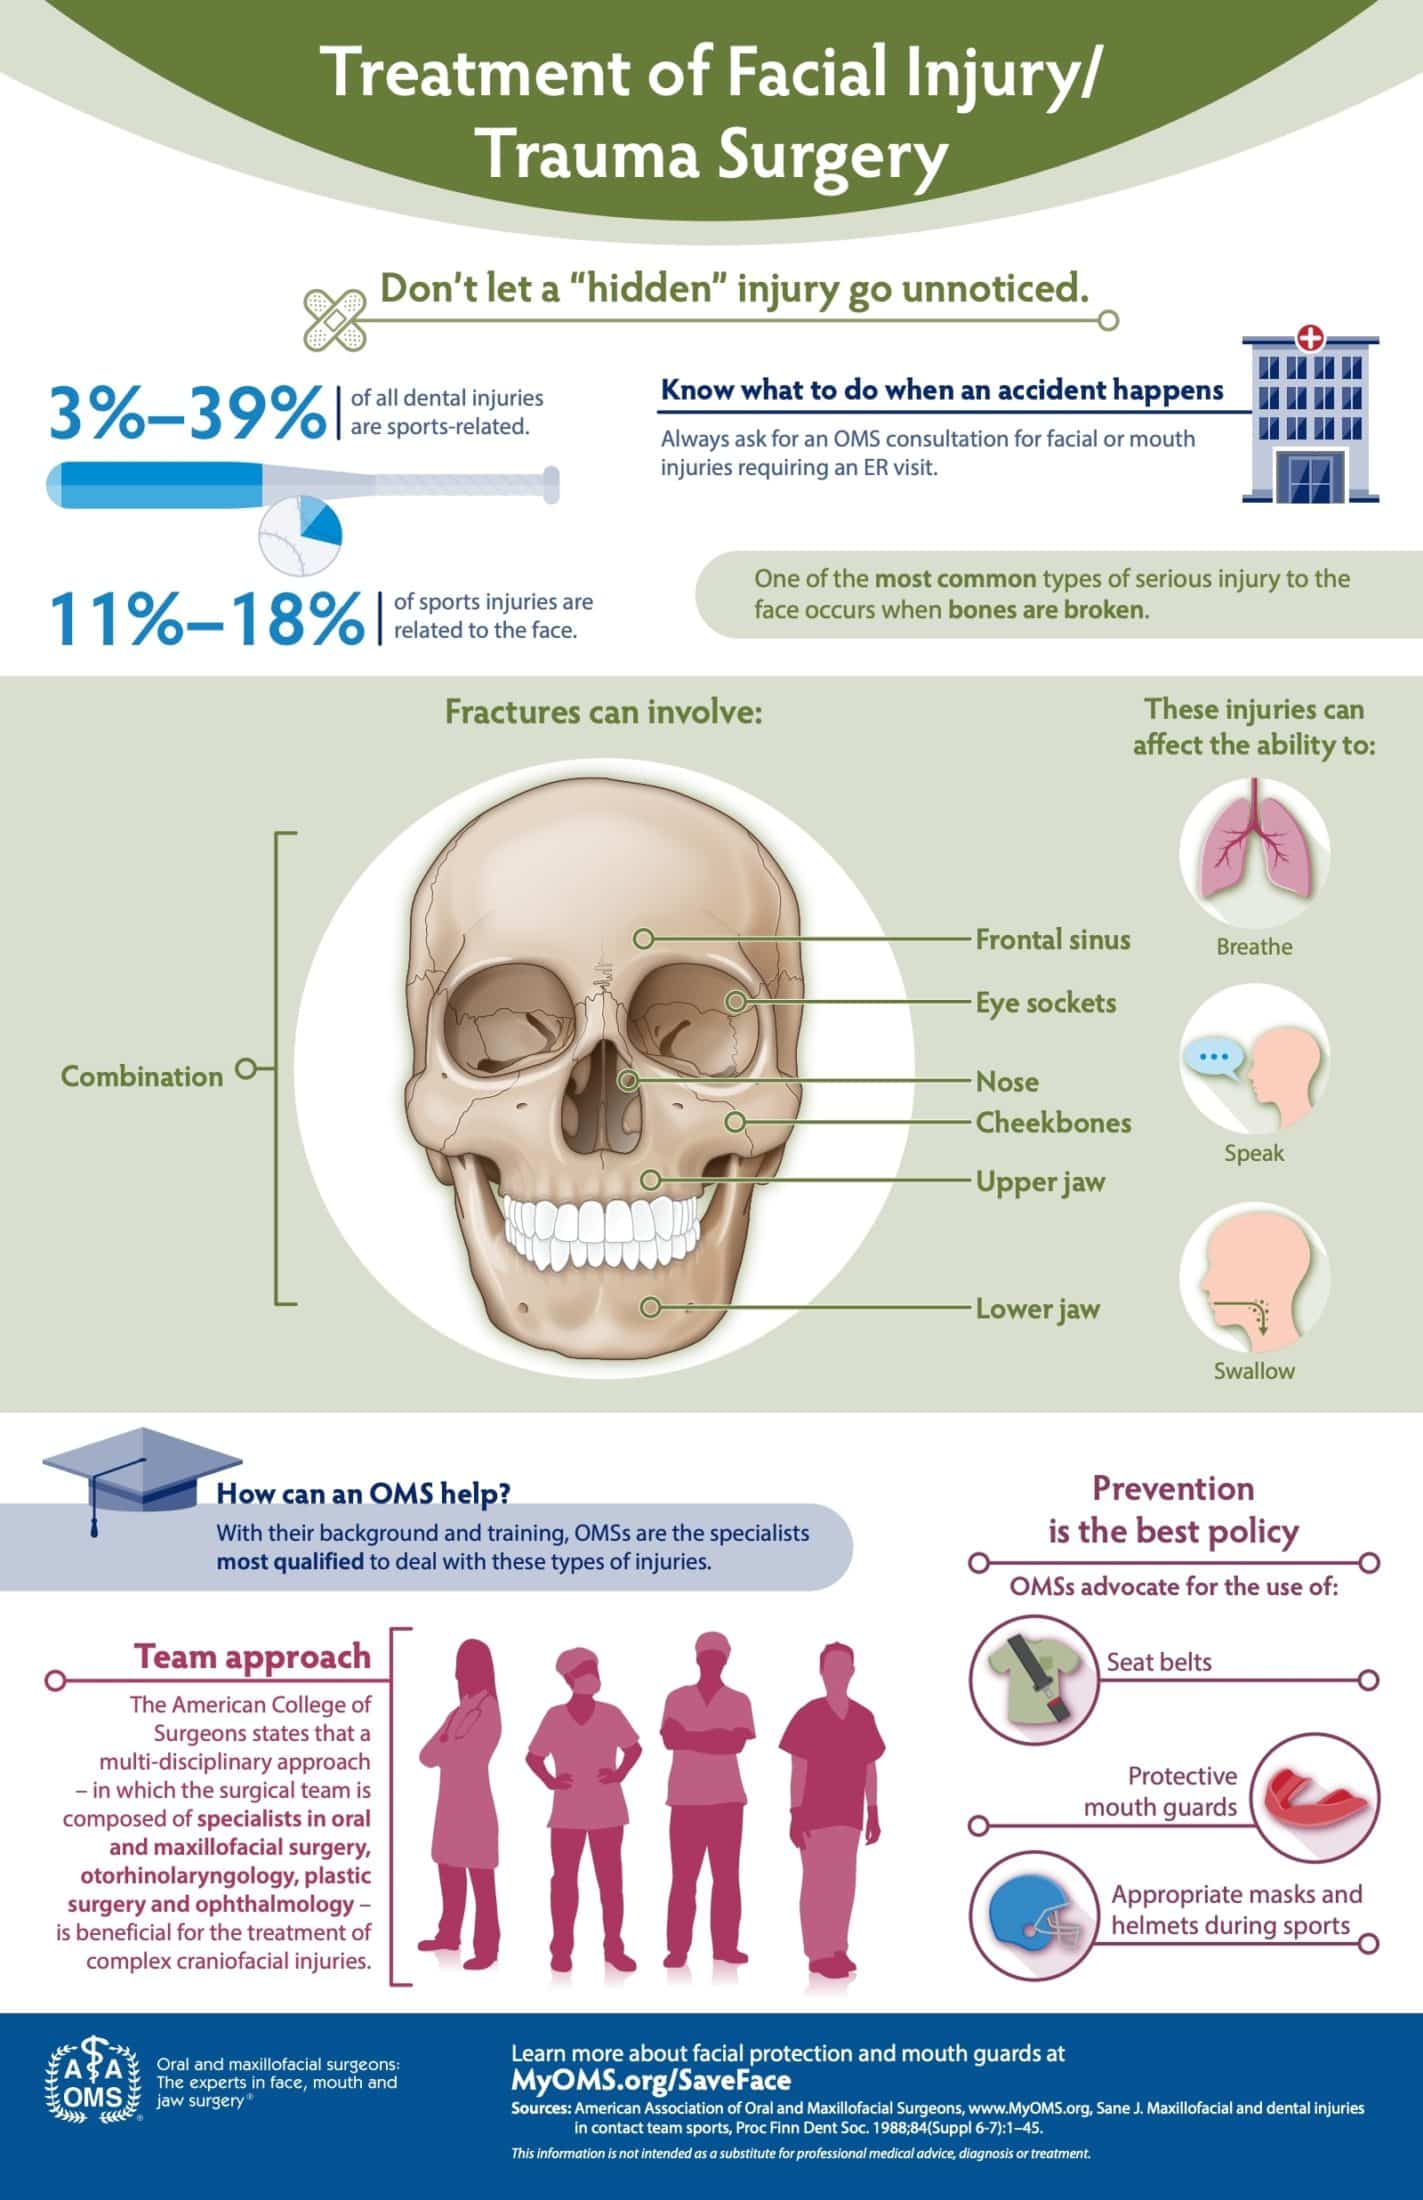 Treatment of Facial Injury Infographic